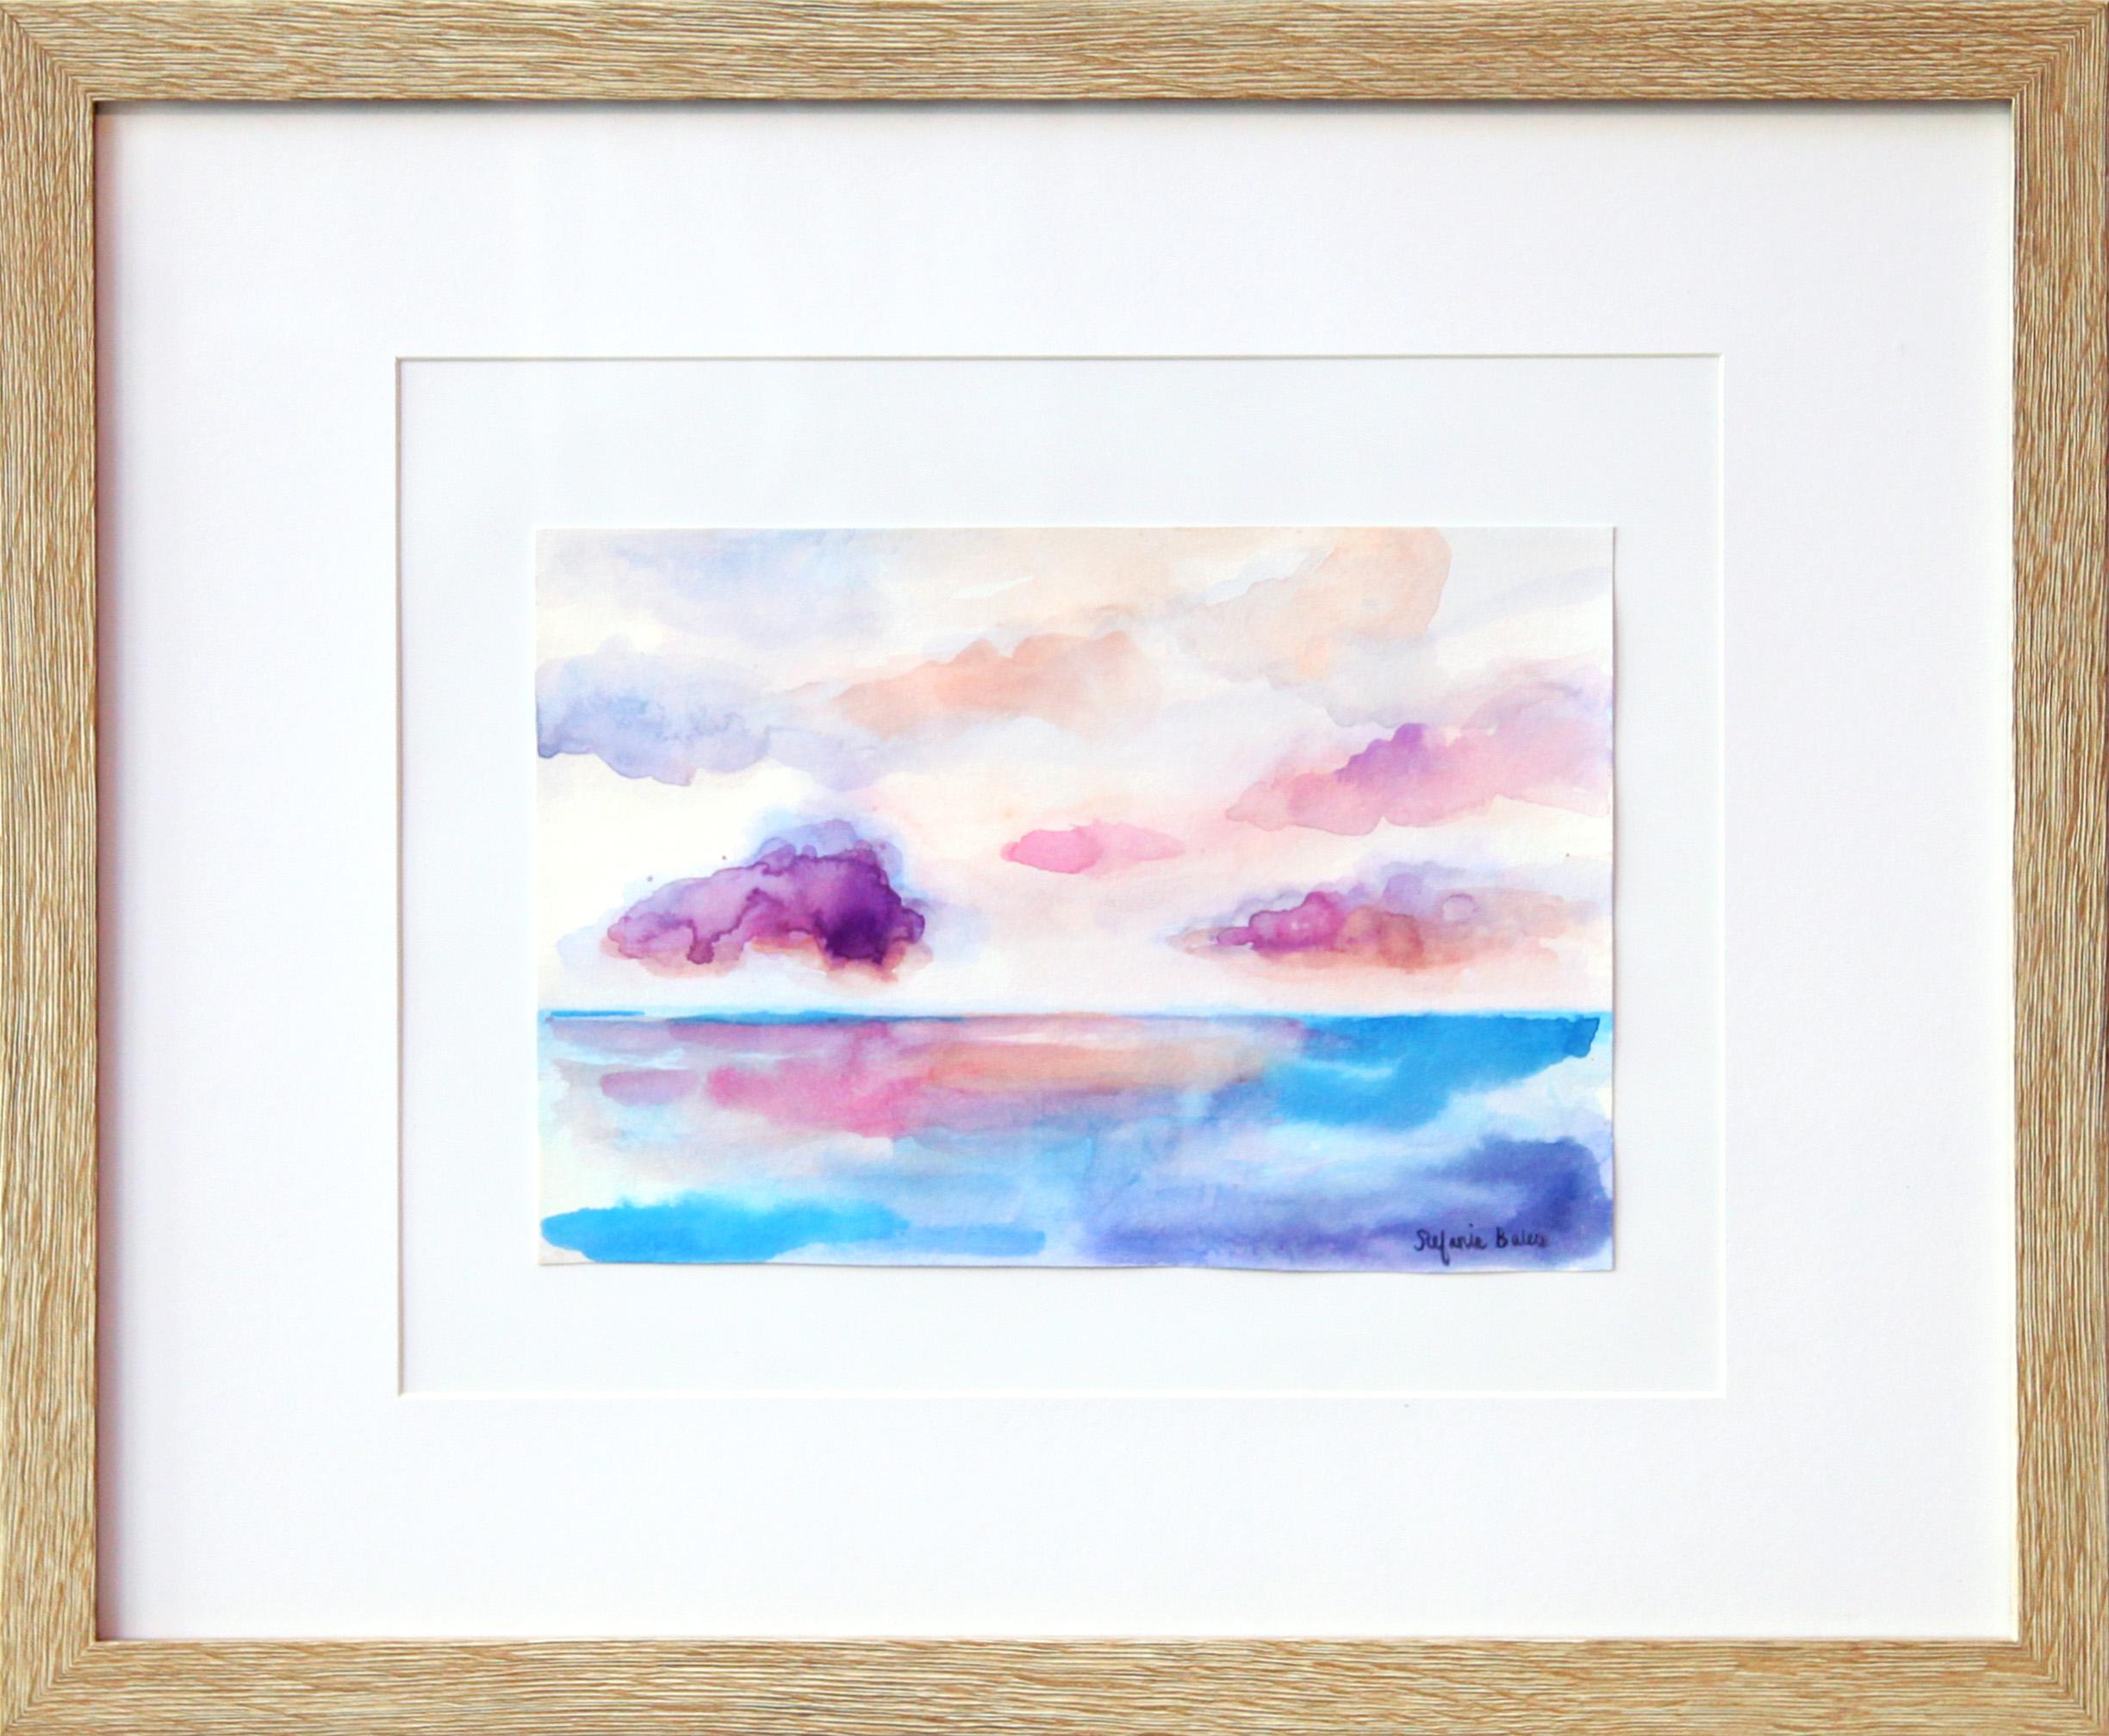 Stefanie Bales Abstract Painting - An Impressionist Watercolor on Paper Seascape Painting, "Violet Skies"